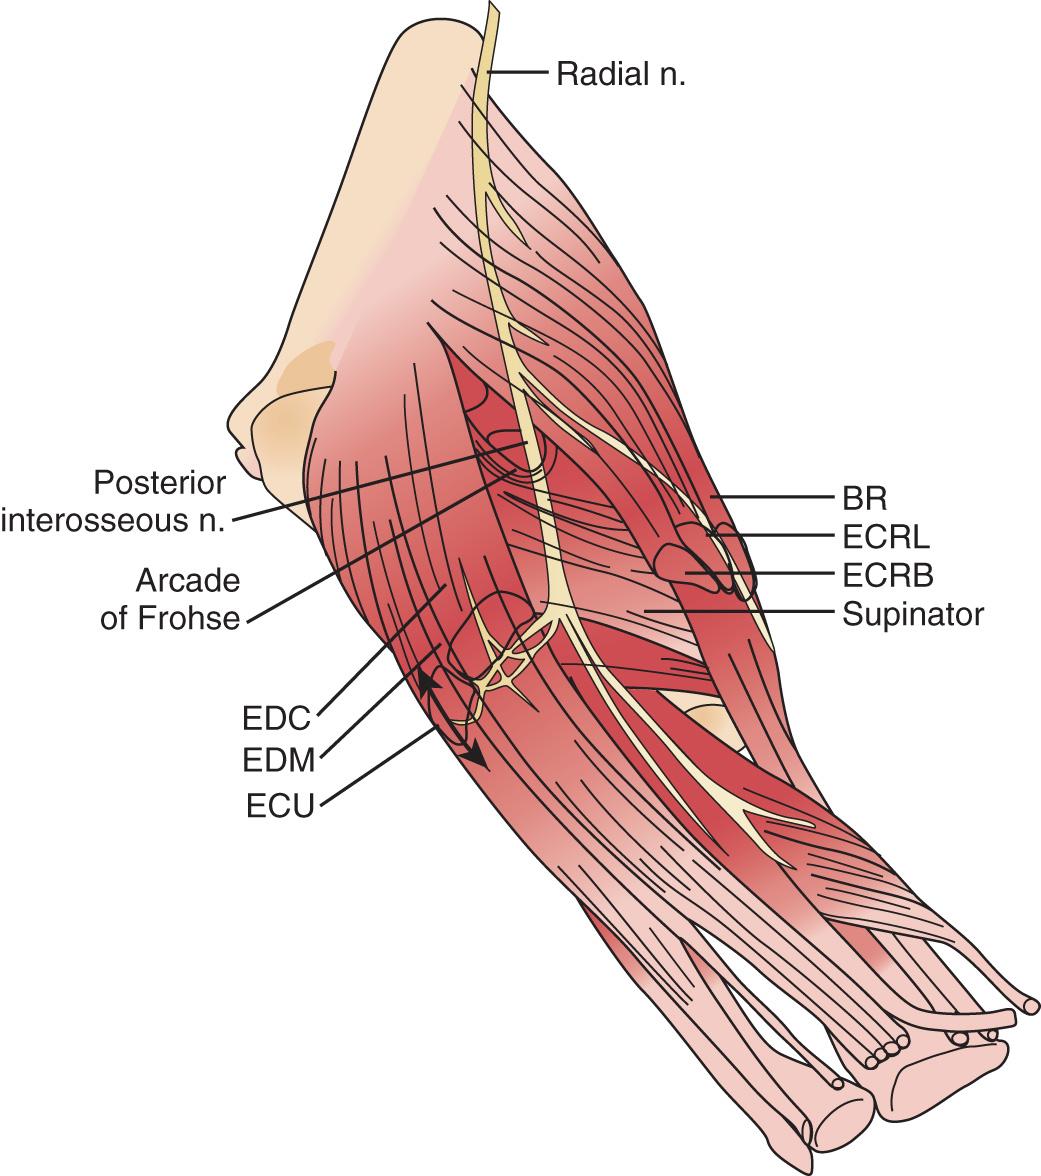 FIG 72.10, Details of the innervation provided by the posterior interosseous nerve. The nerve may be traced to the supinator showing the terminal branches. BR , Brachioradialis; ECRB , extensor carpi radialis brevis; ECRL , extensor carpi radialis longus; ECU , extensor carpi ulnaris; EDC , extensor digitorum communis; EDM , extensor digitorum minimi; n , nerve.